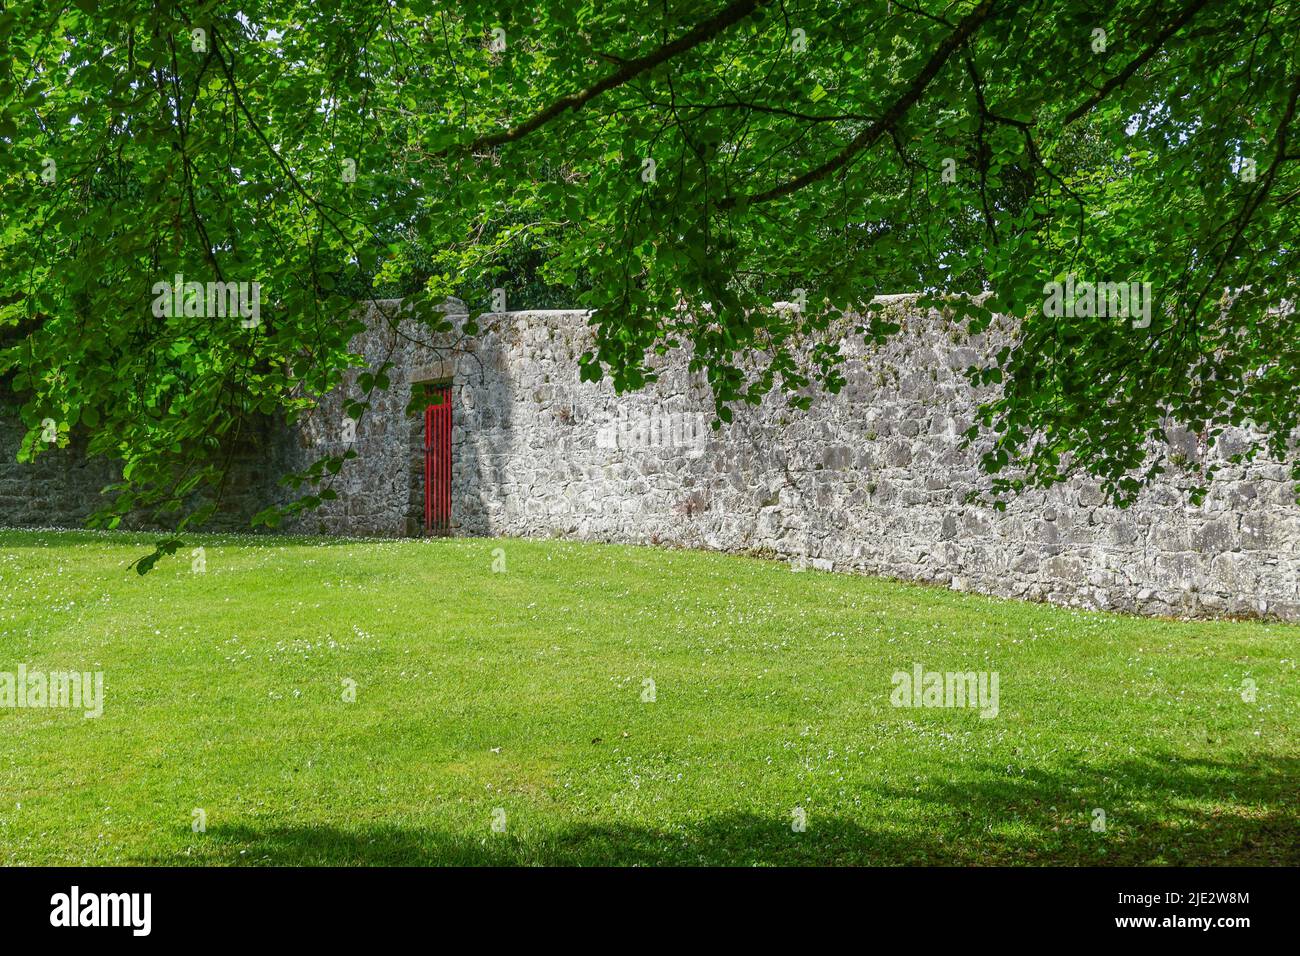 Gort, Co. Galway, Ireland: A red gate in the walled garden at Coole Park. Stock Photo